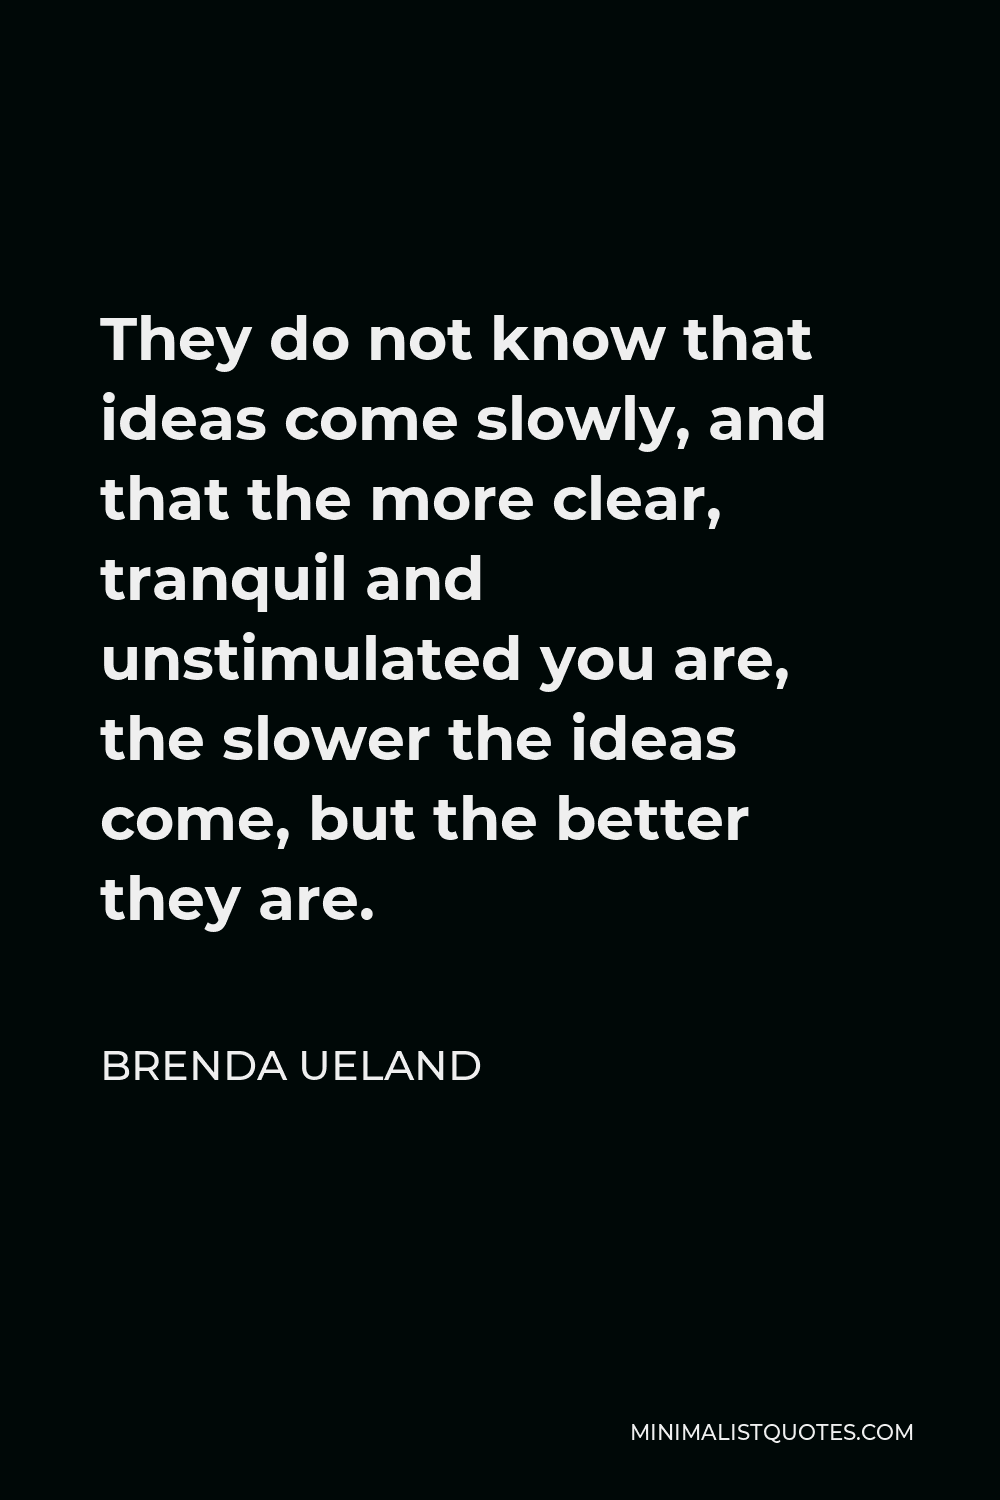 Brenda Ueland Quote - They do not know that ideas come slowly, and that the more clear, tranquil and unstimulated you are, the slower the ideas come, but the better they are.